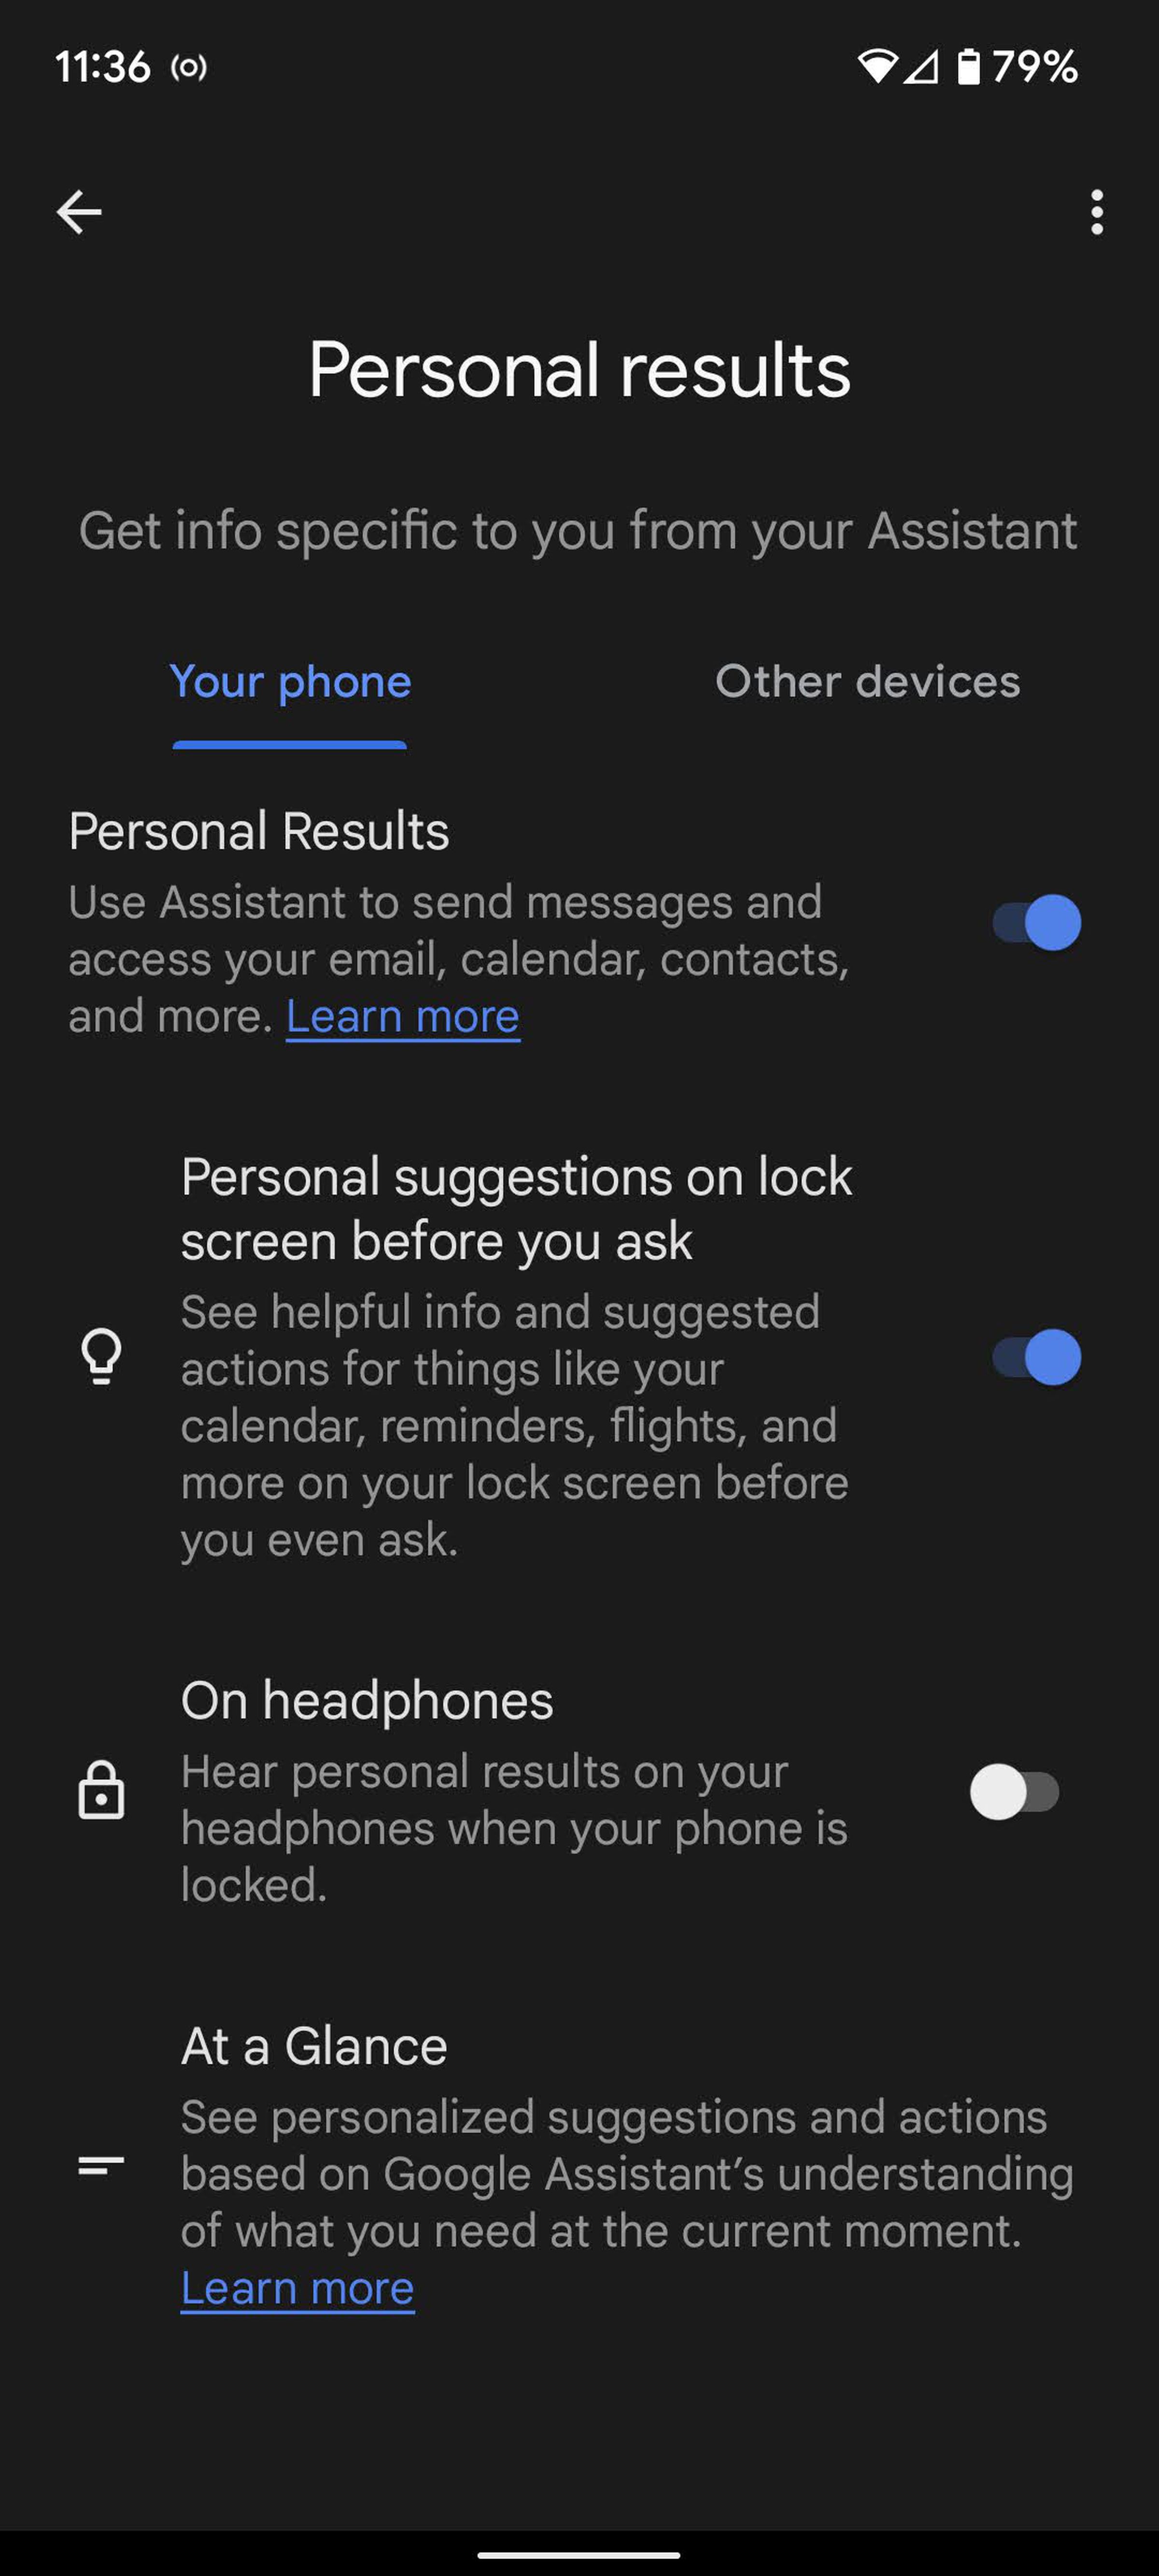 Now you can enable personal suggestions on your lock screen